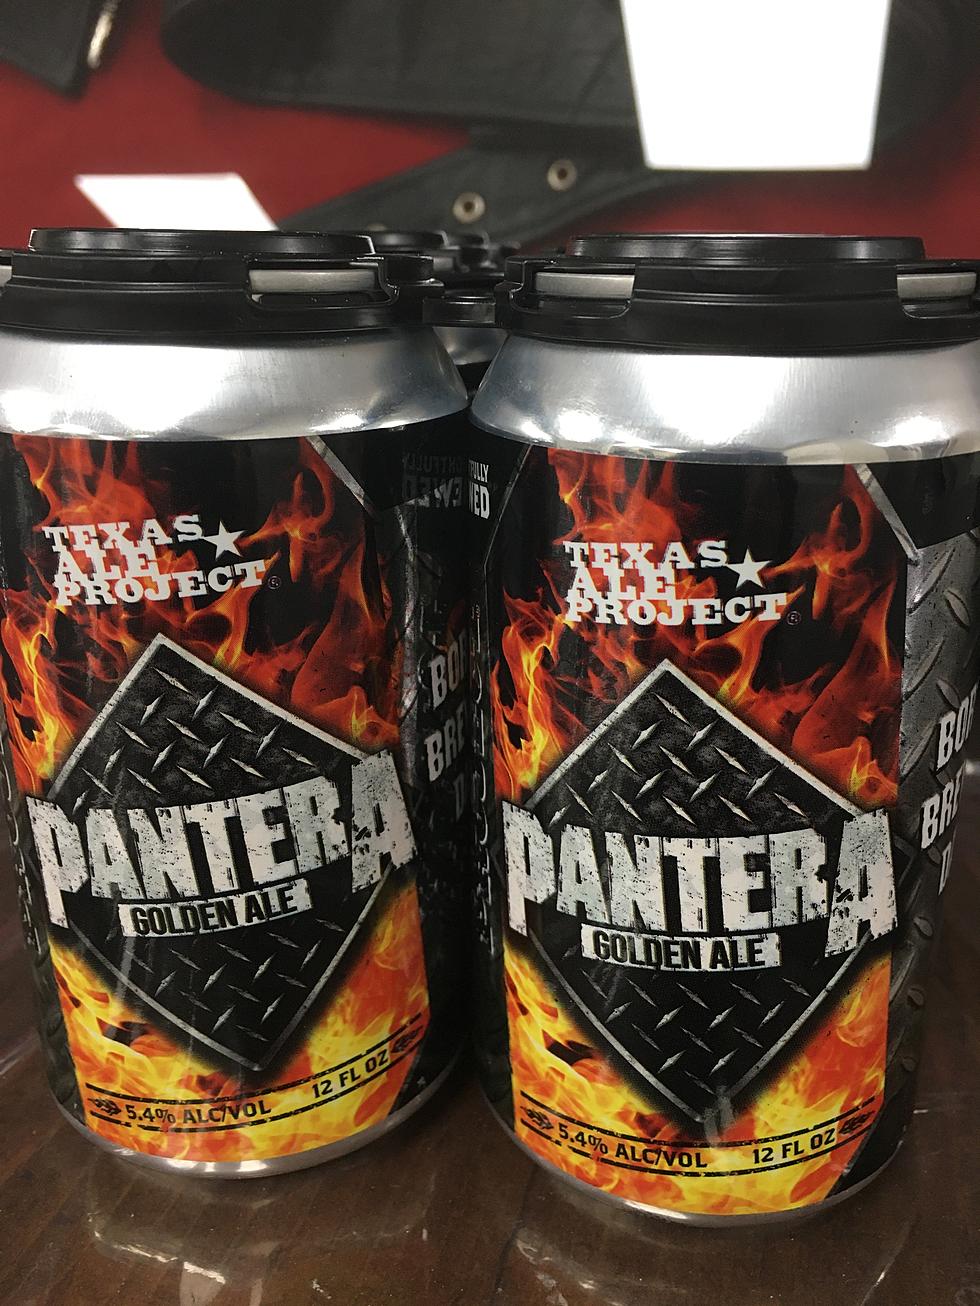 The Most Metal Beer, Pantera Golden Ale, Hits Lubbock